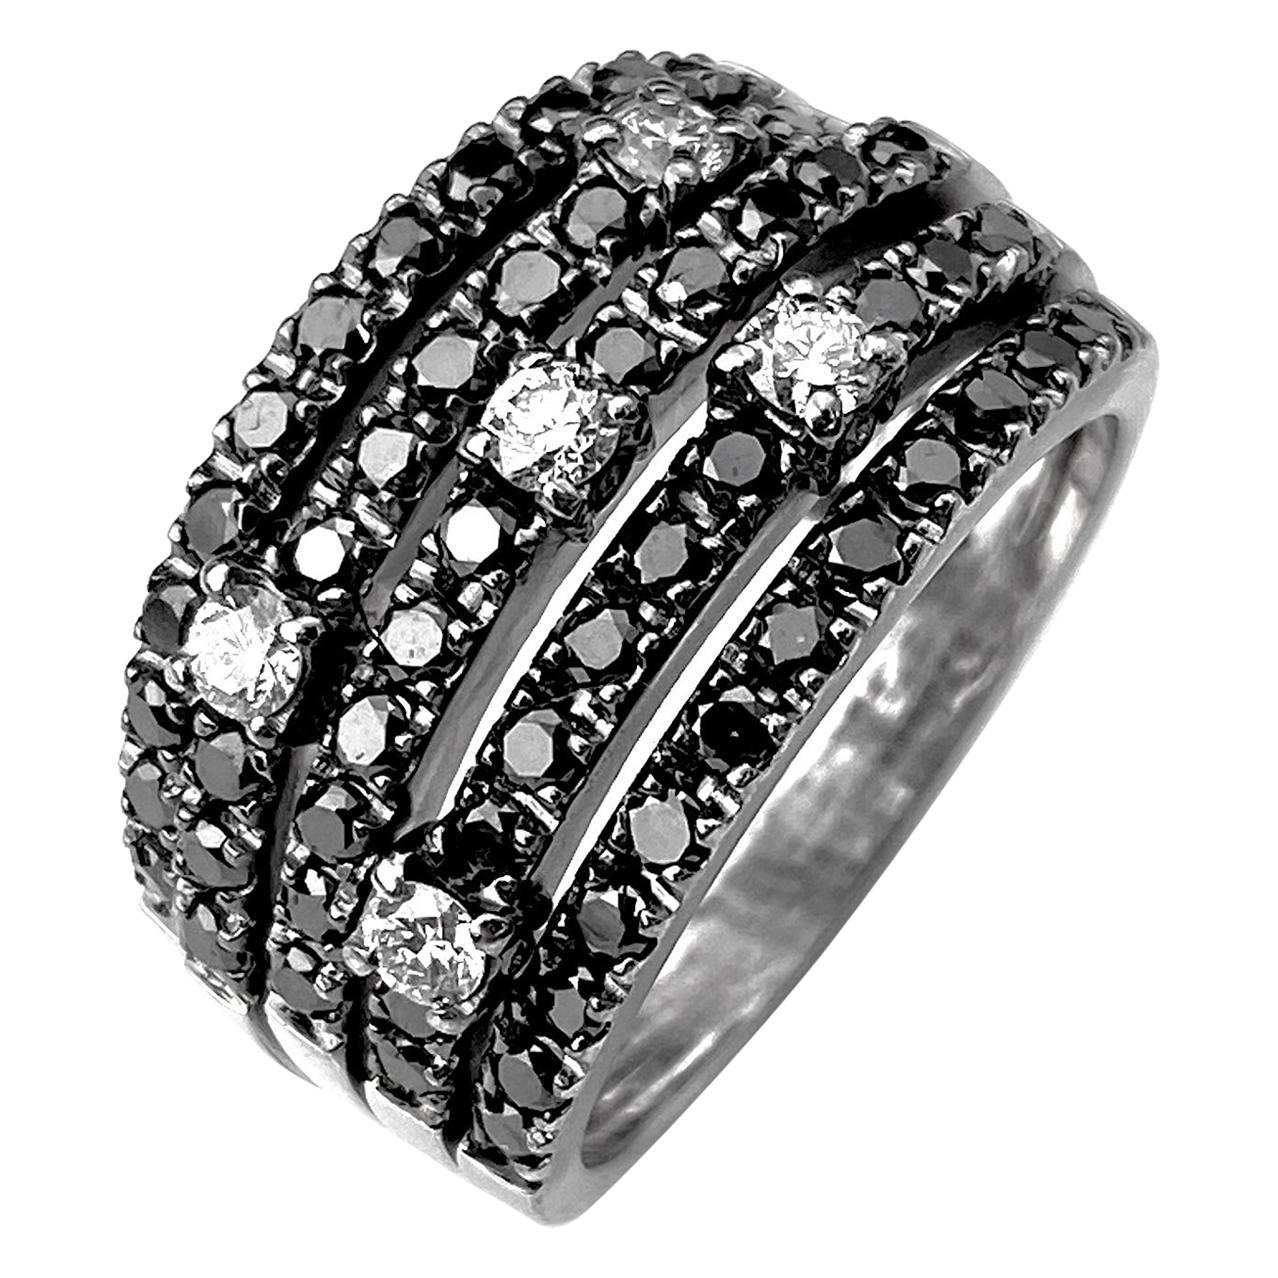 Black Diamond Five-Row Ring with White Diamond Accents For Sale